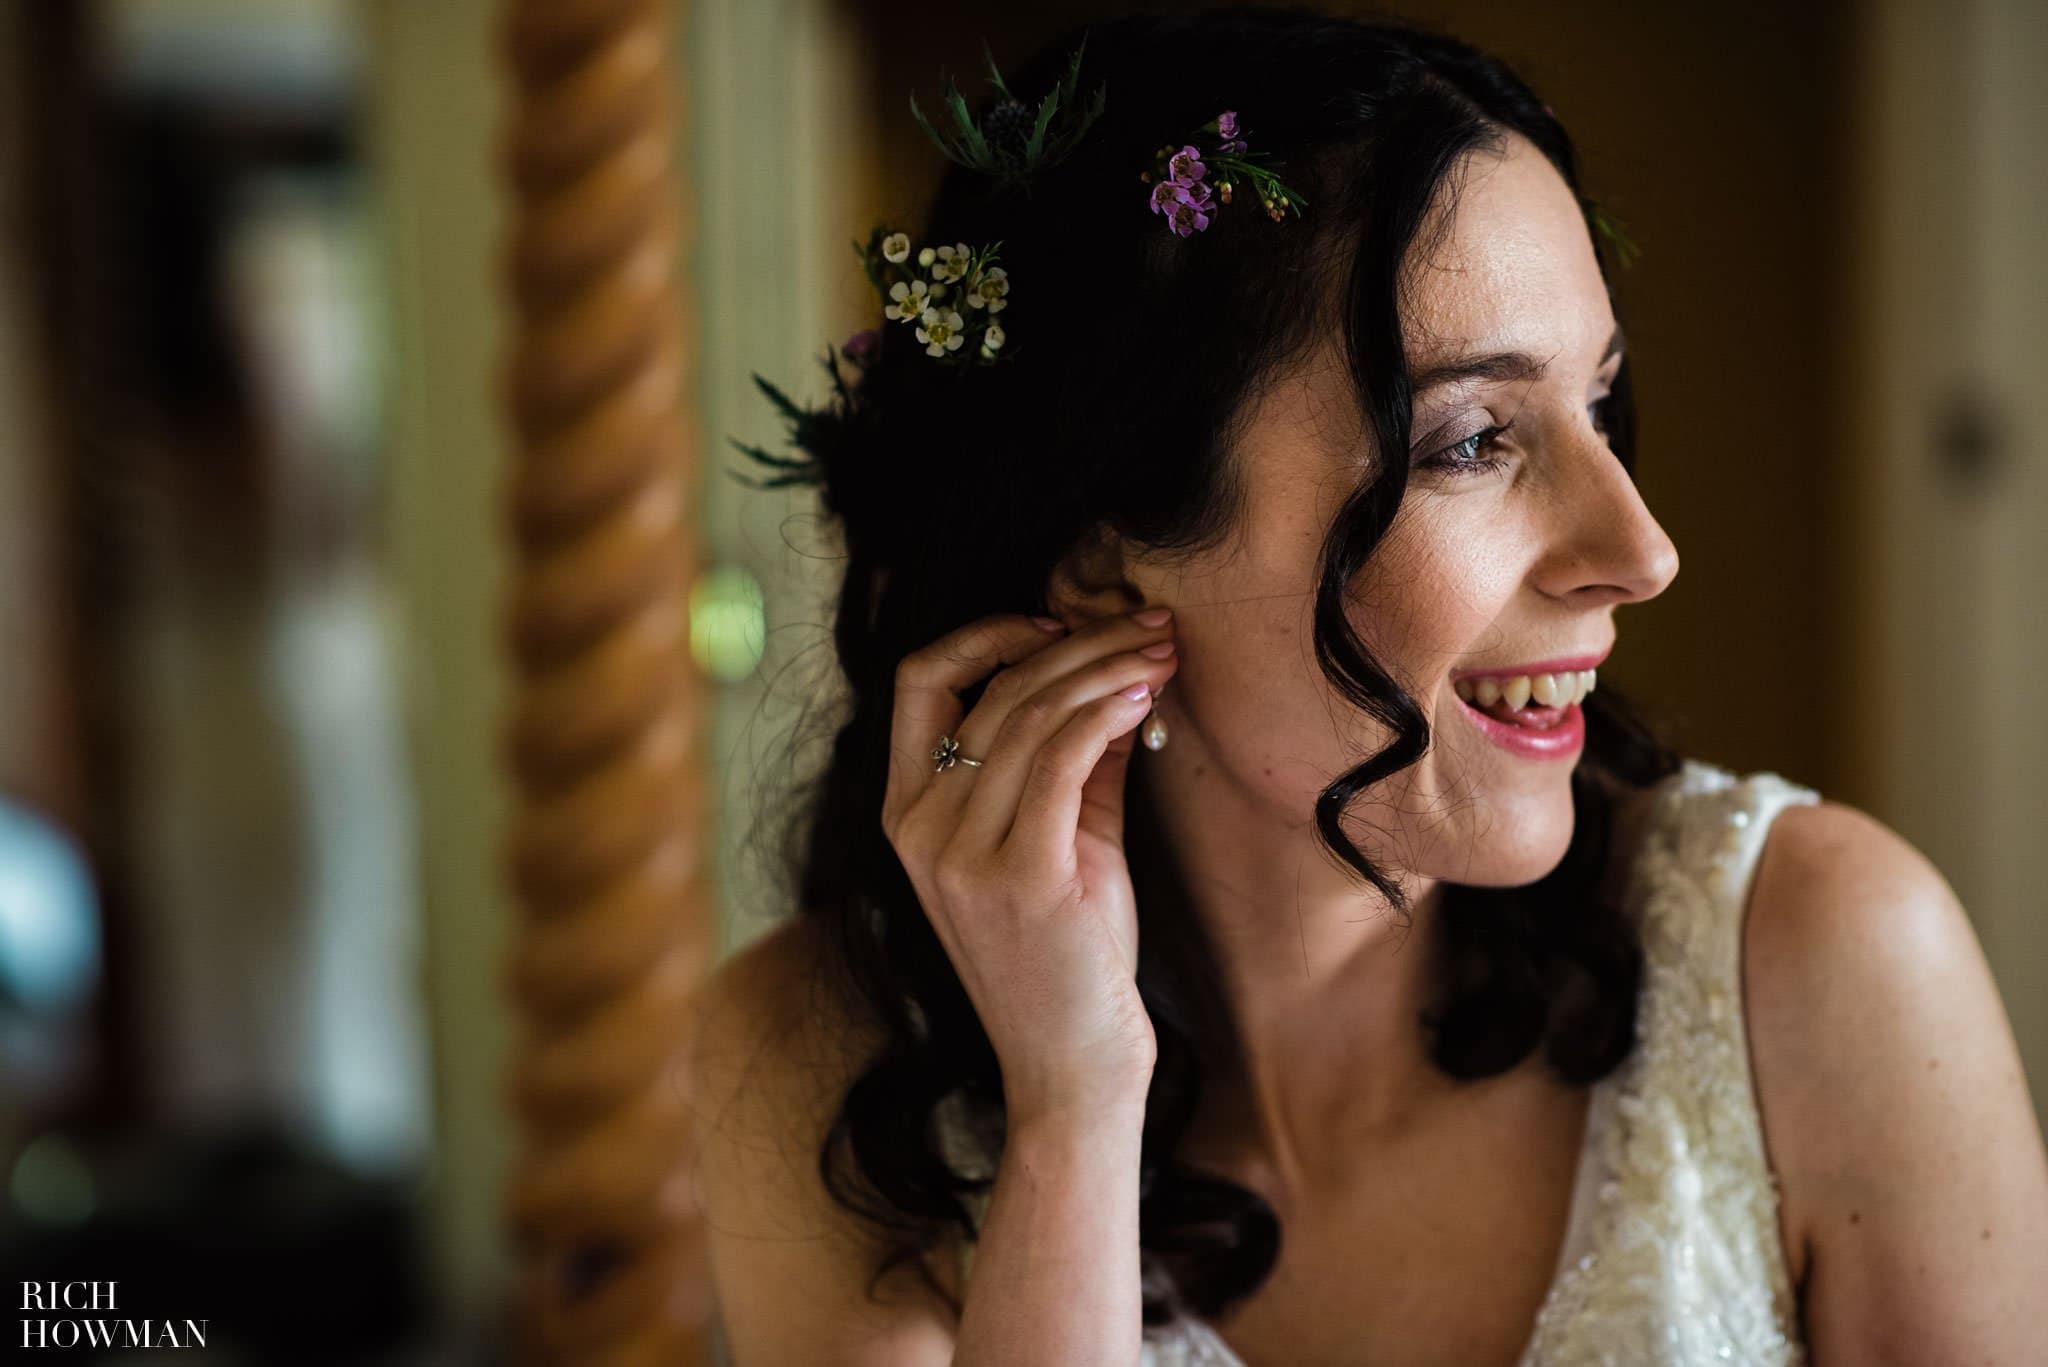 Photograph of Bride smiling